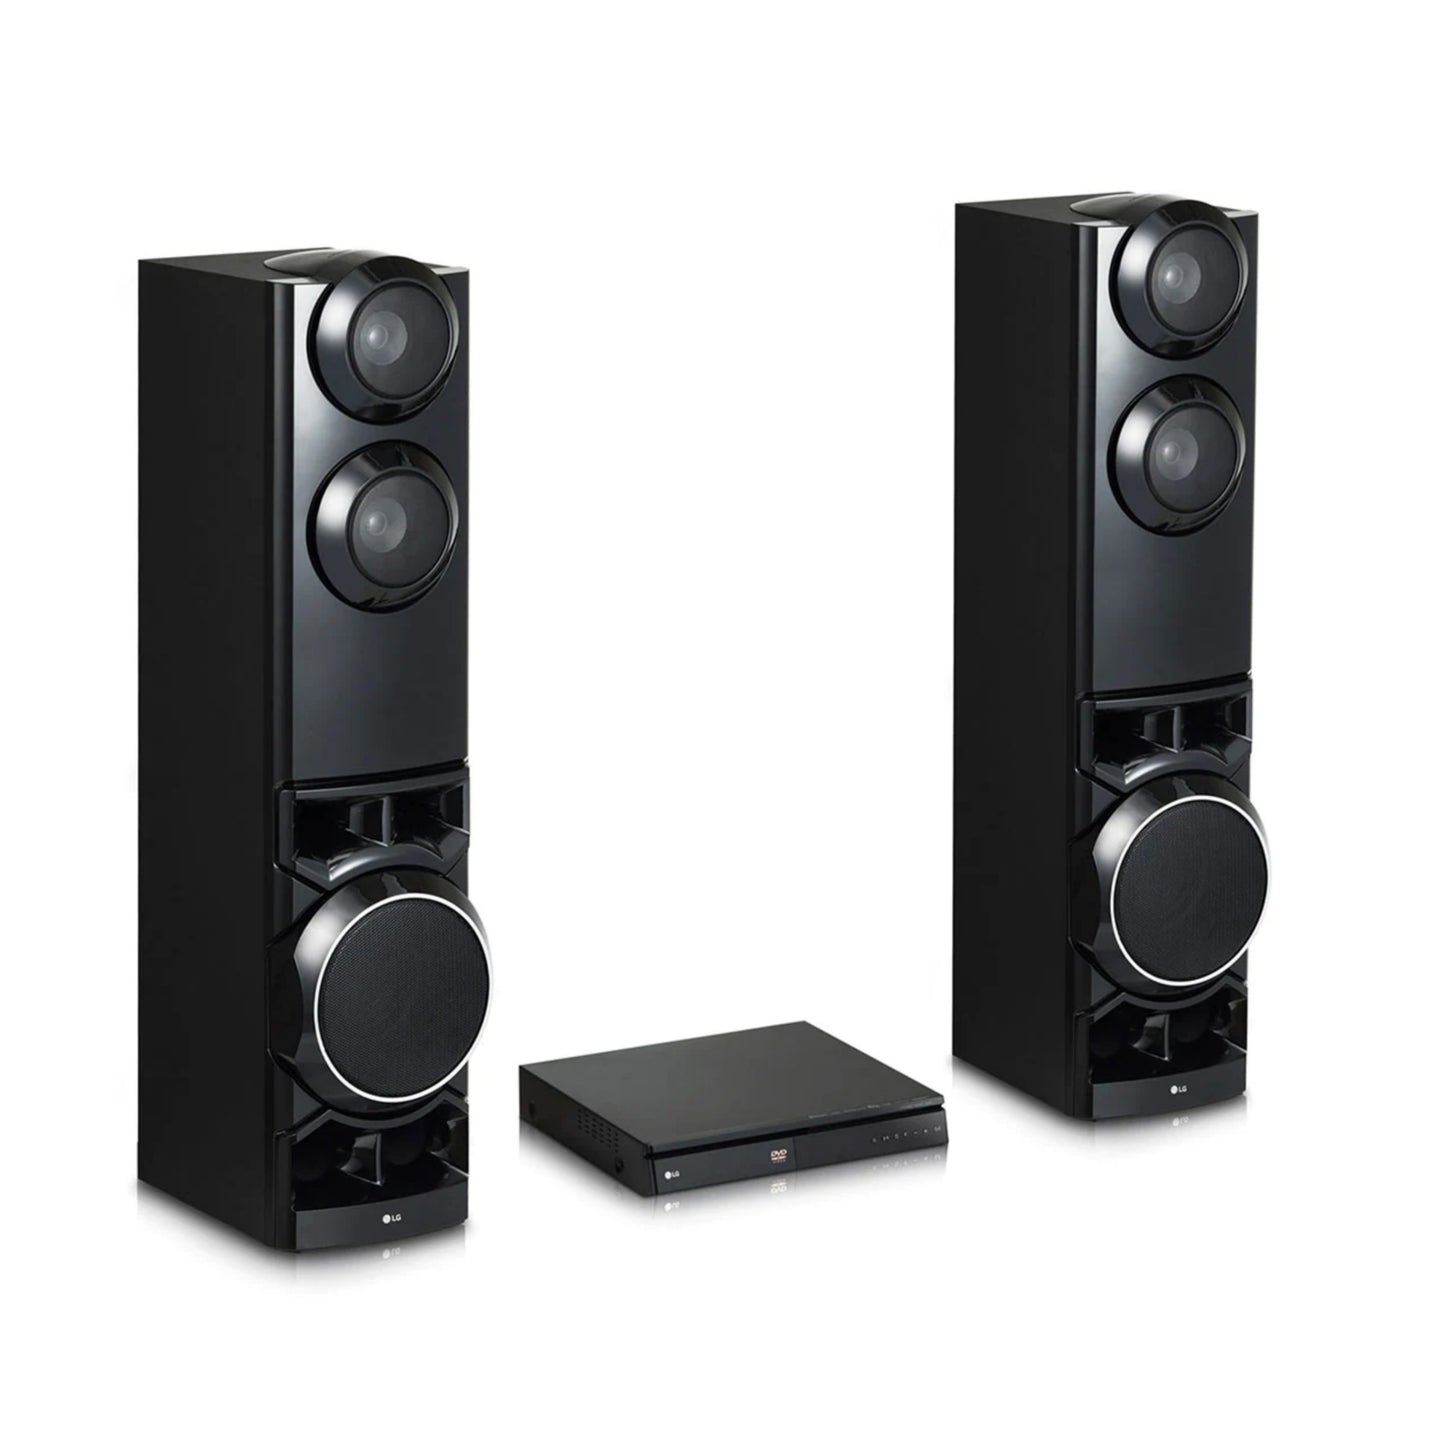 Brand New LG LHD687 Dual Subwoofer 1200 Watts with USB, FM and Bluetooth